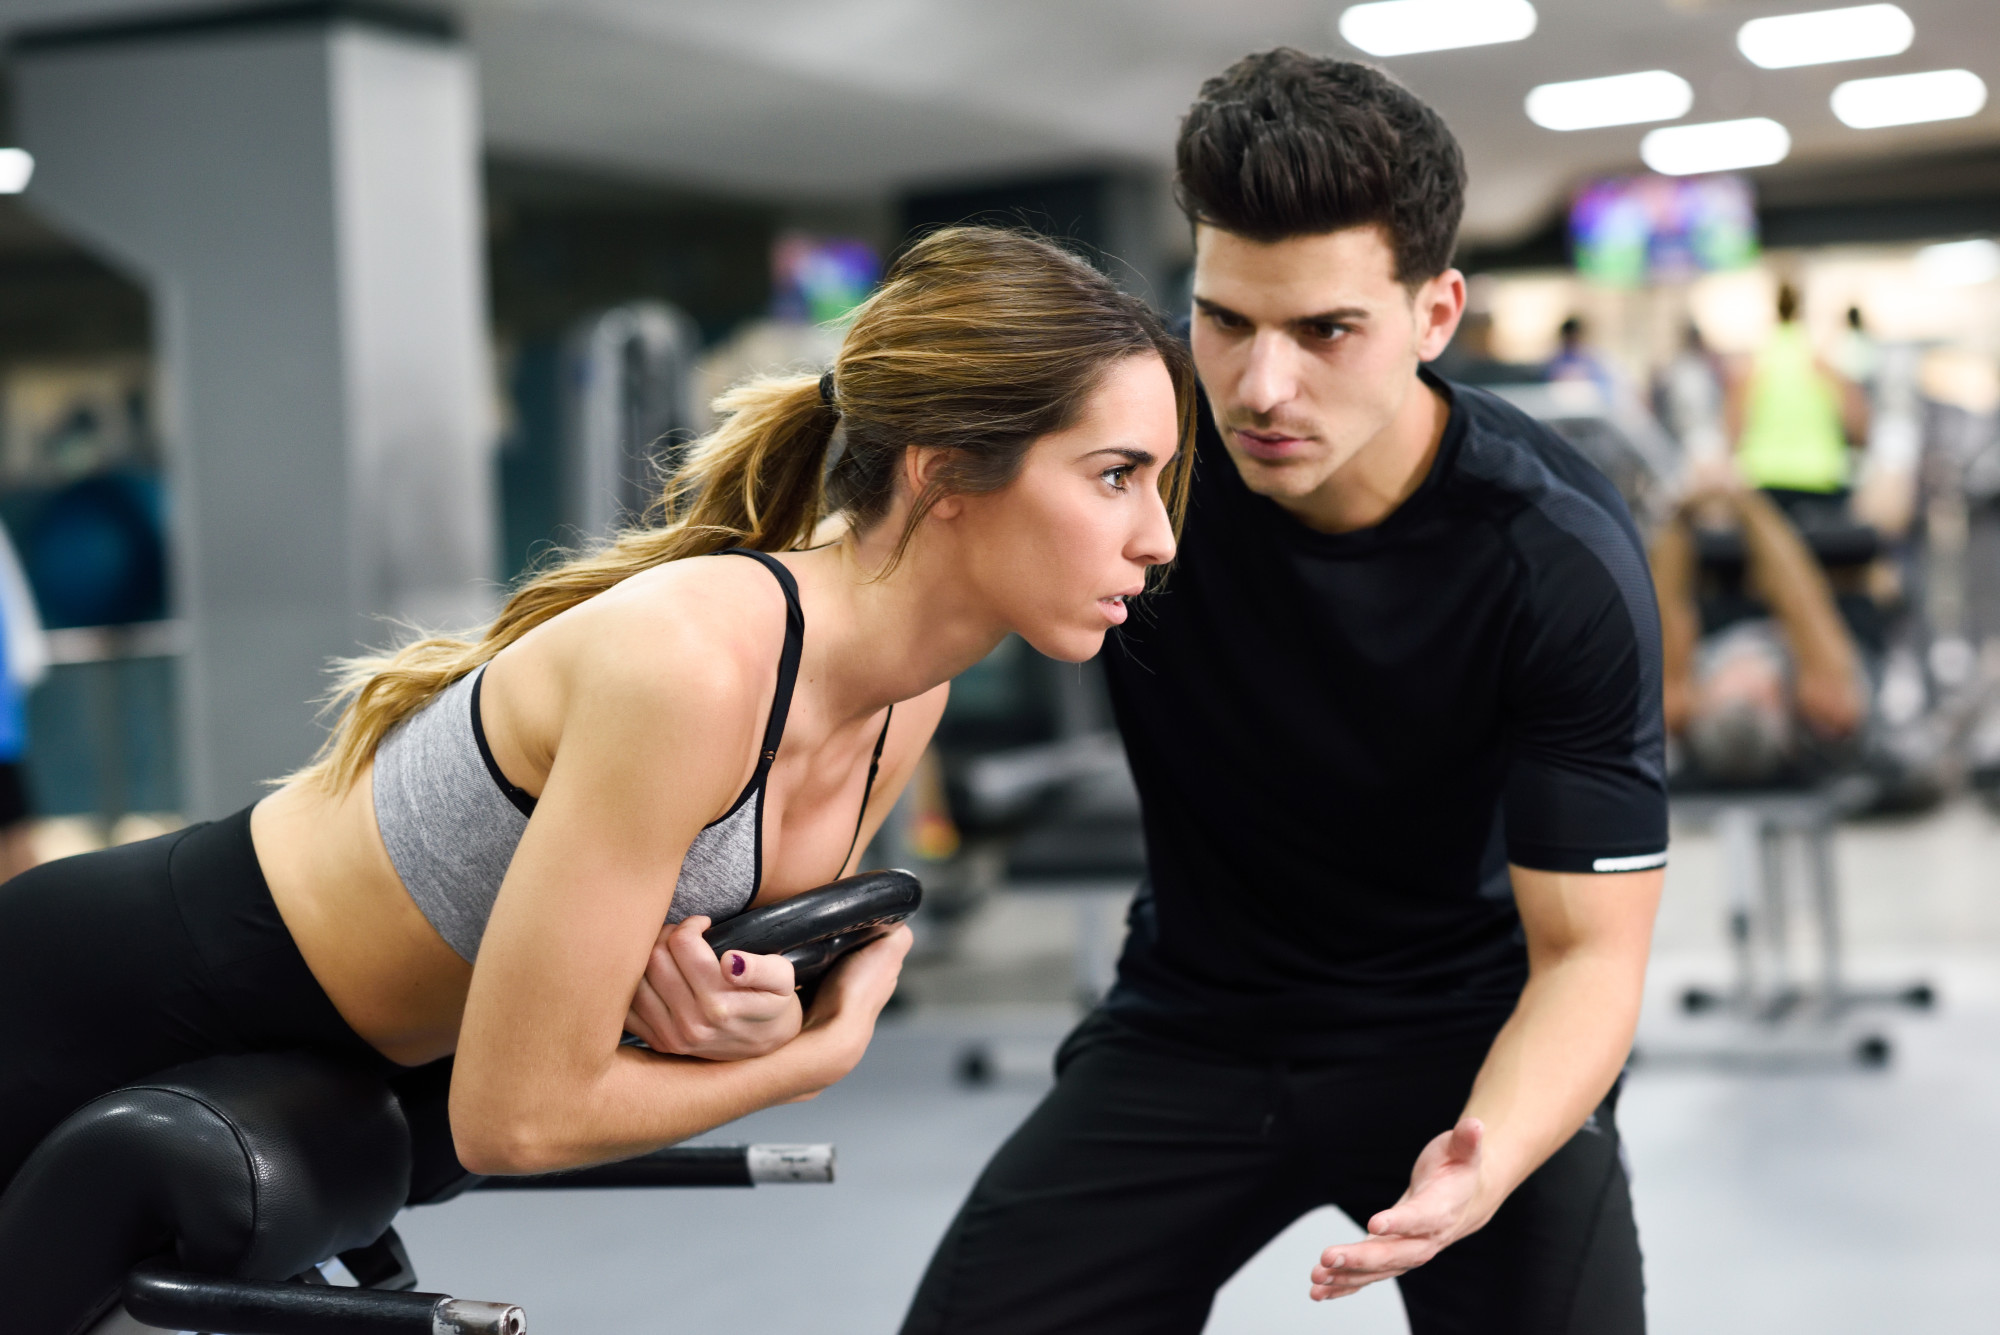 Private Personal Trainer: The Benefits of Becoming a Personal Trainer